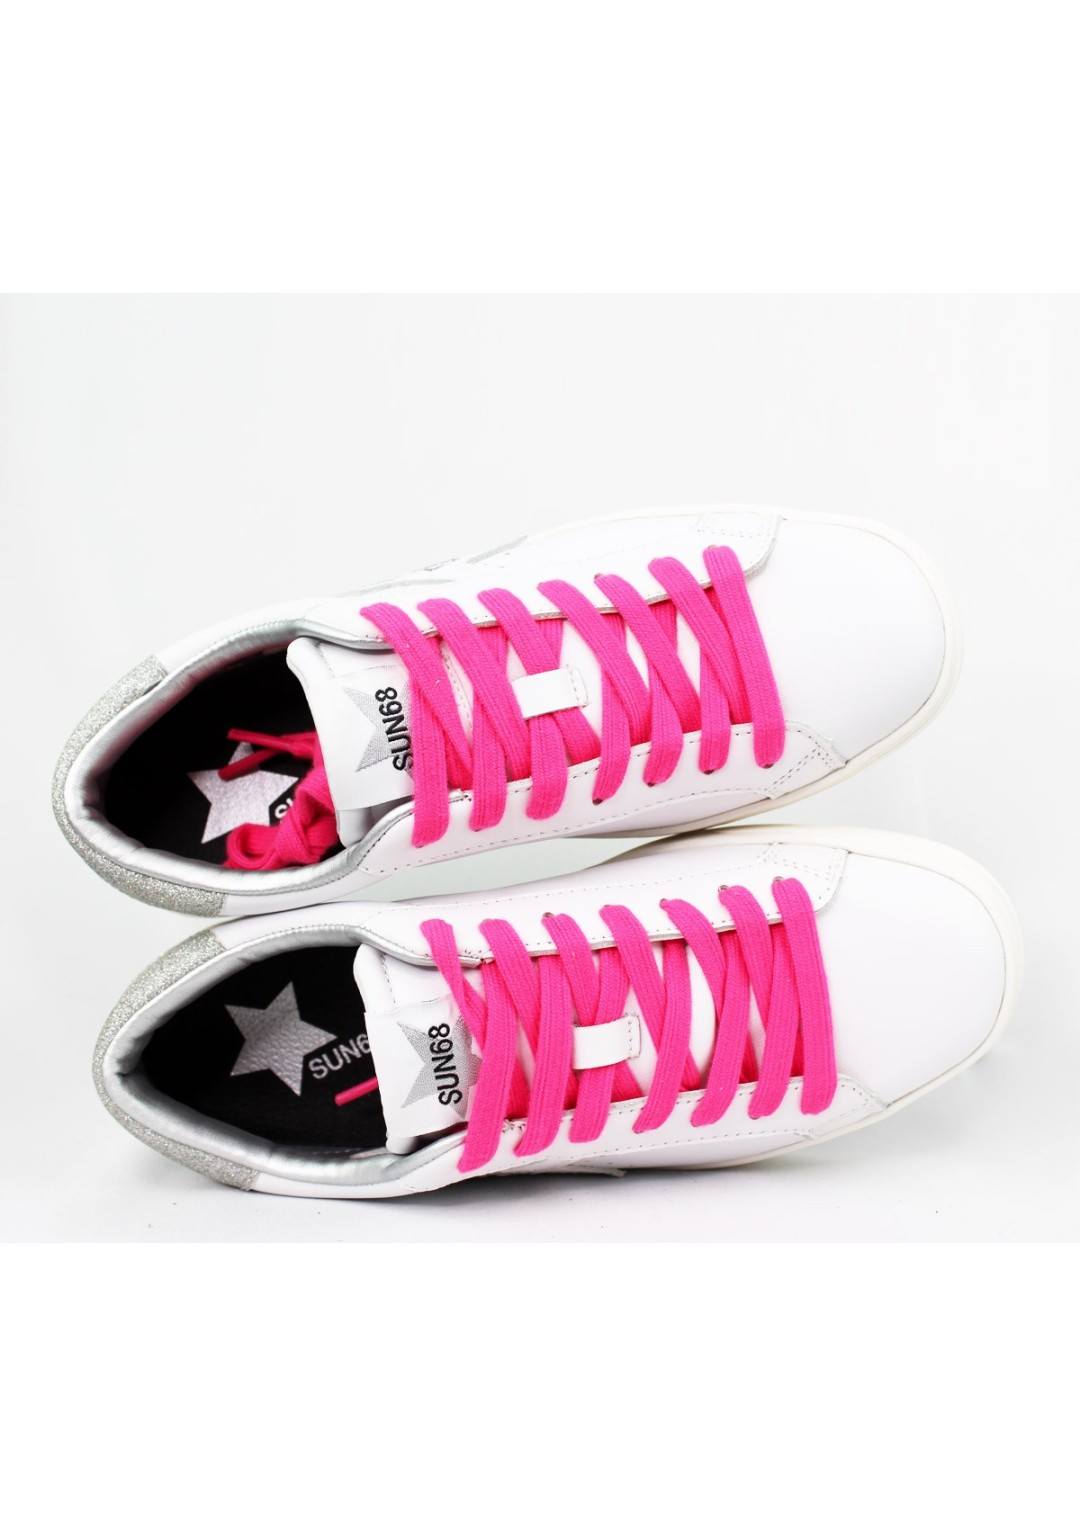 SUN68 Sneakers Donna